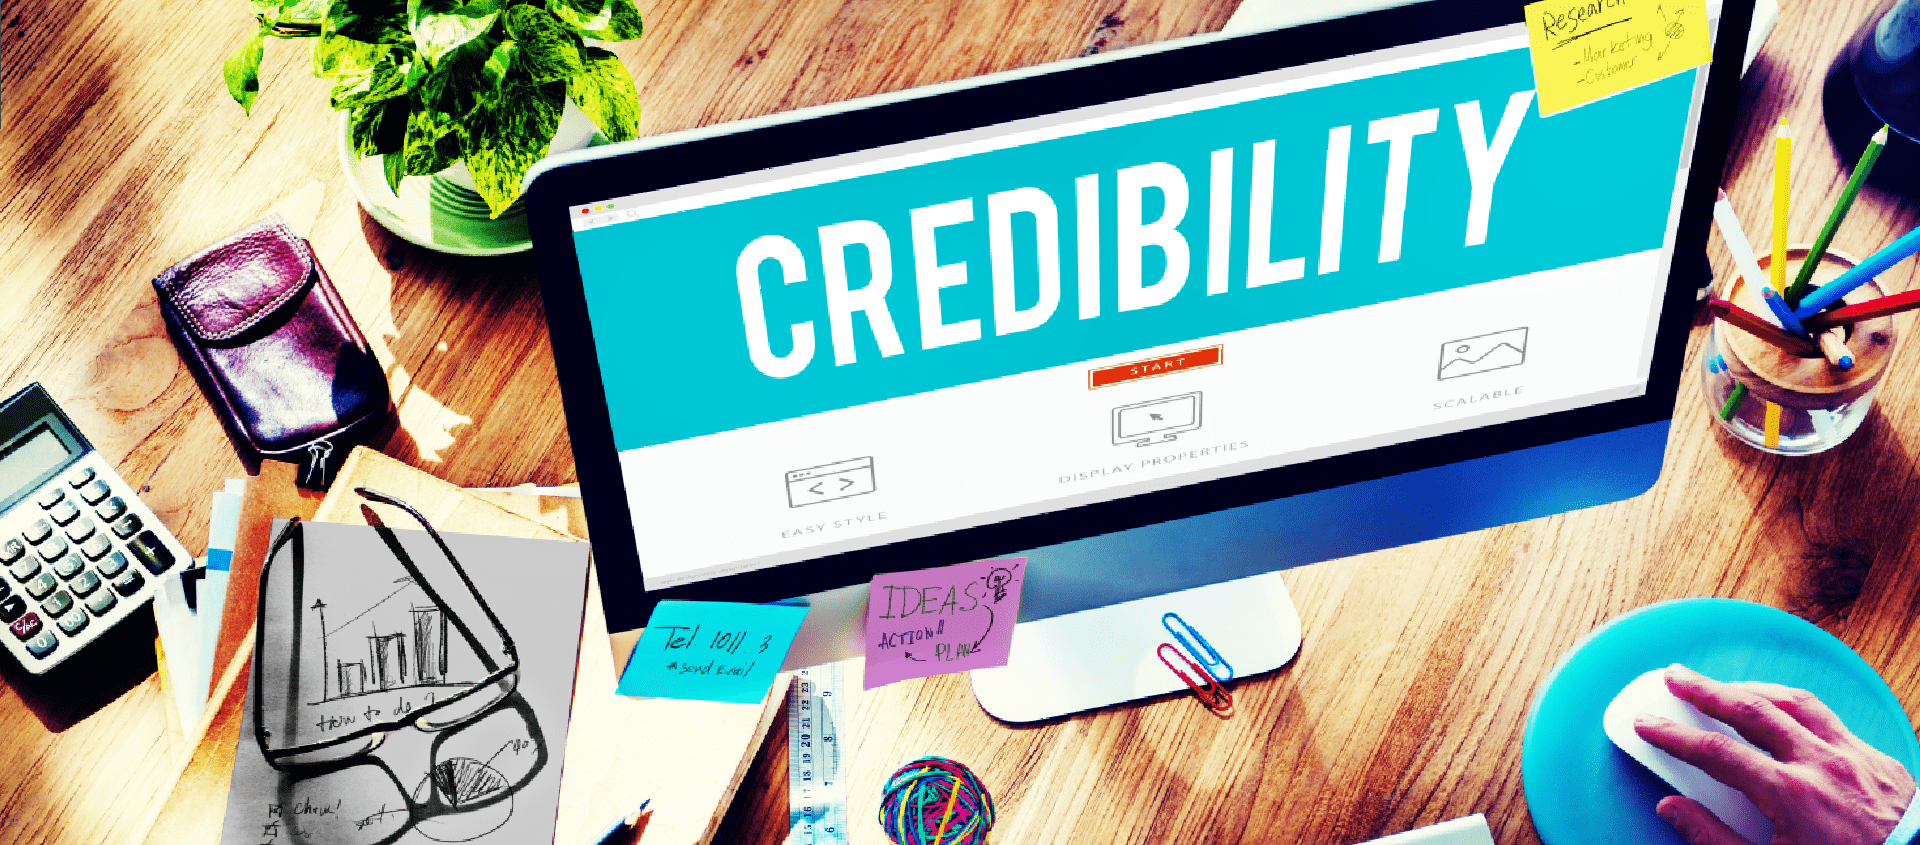 The Online Fake Scare: Your brand needs Online Credibility